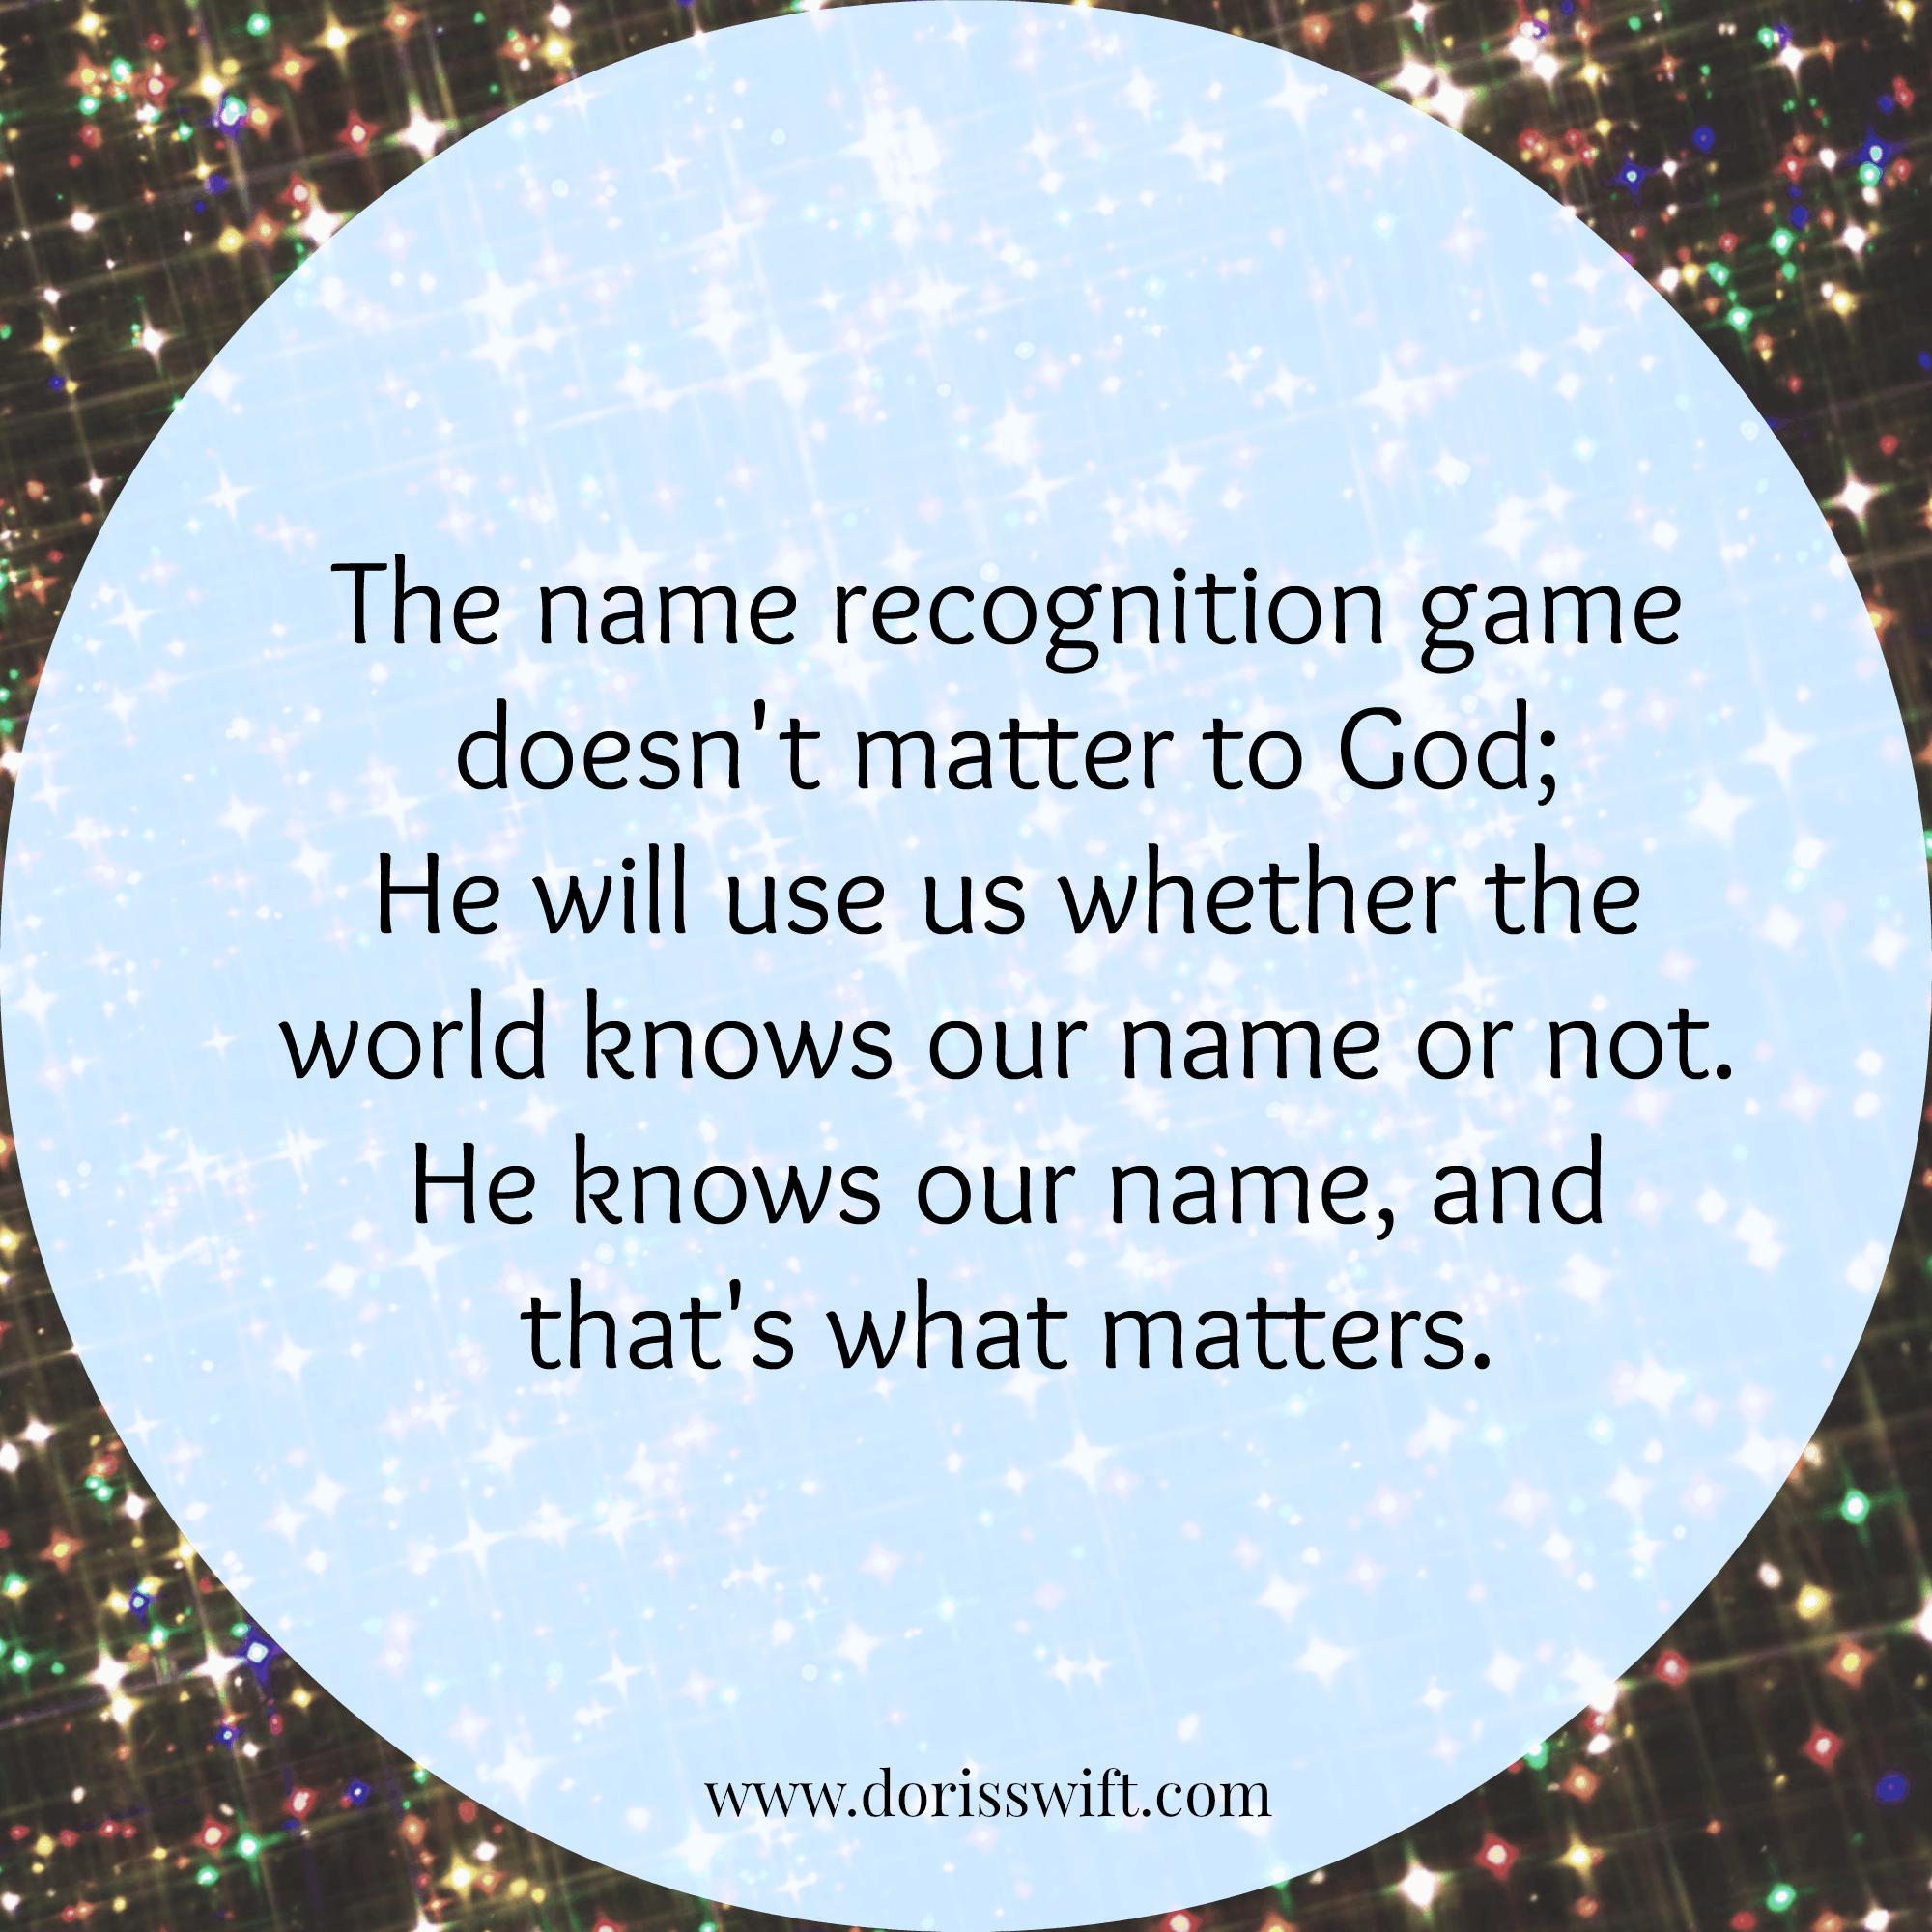 Name recognition game